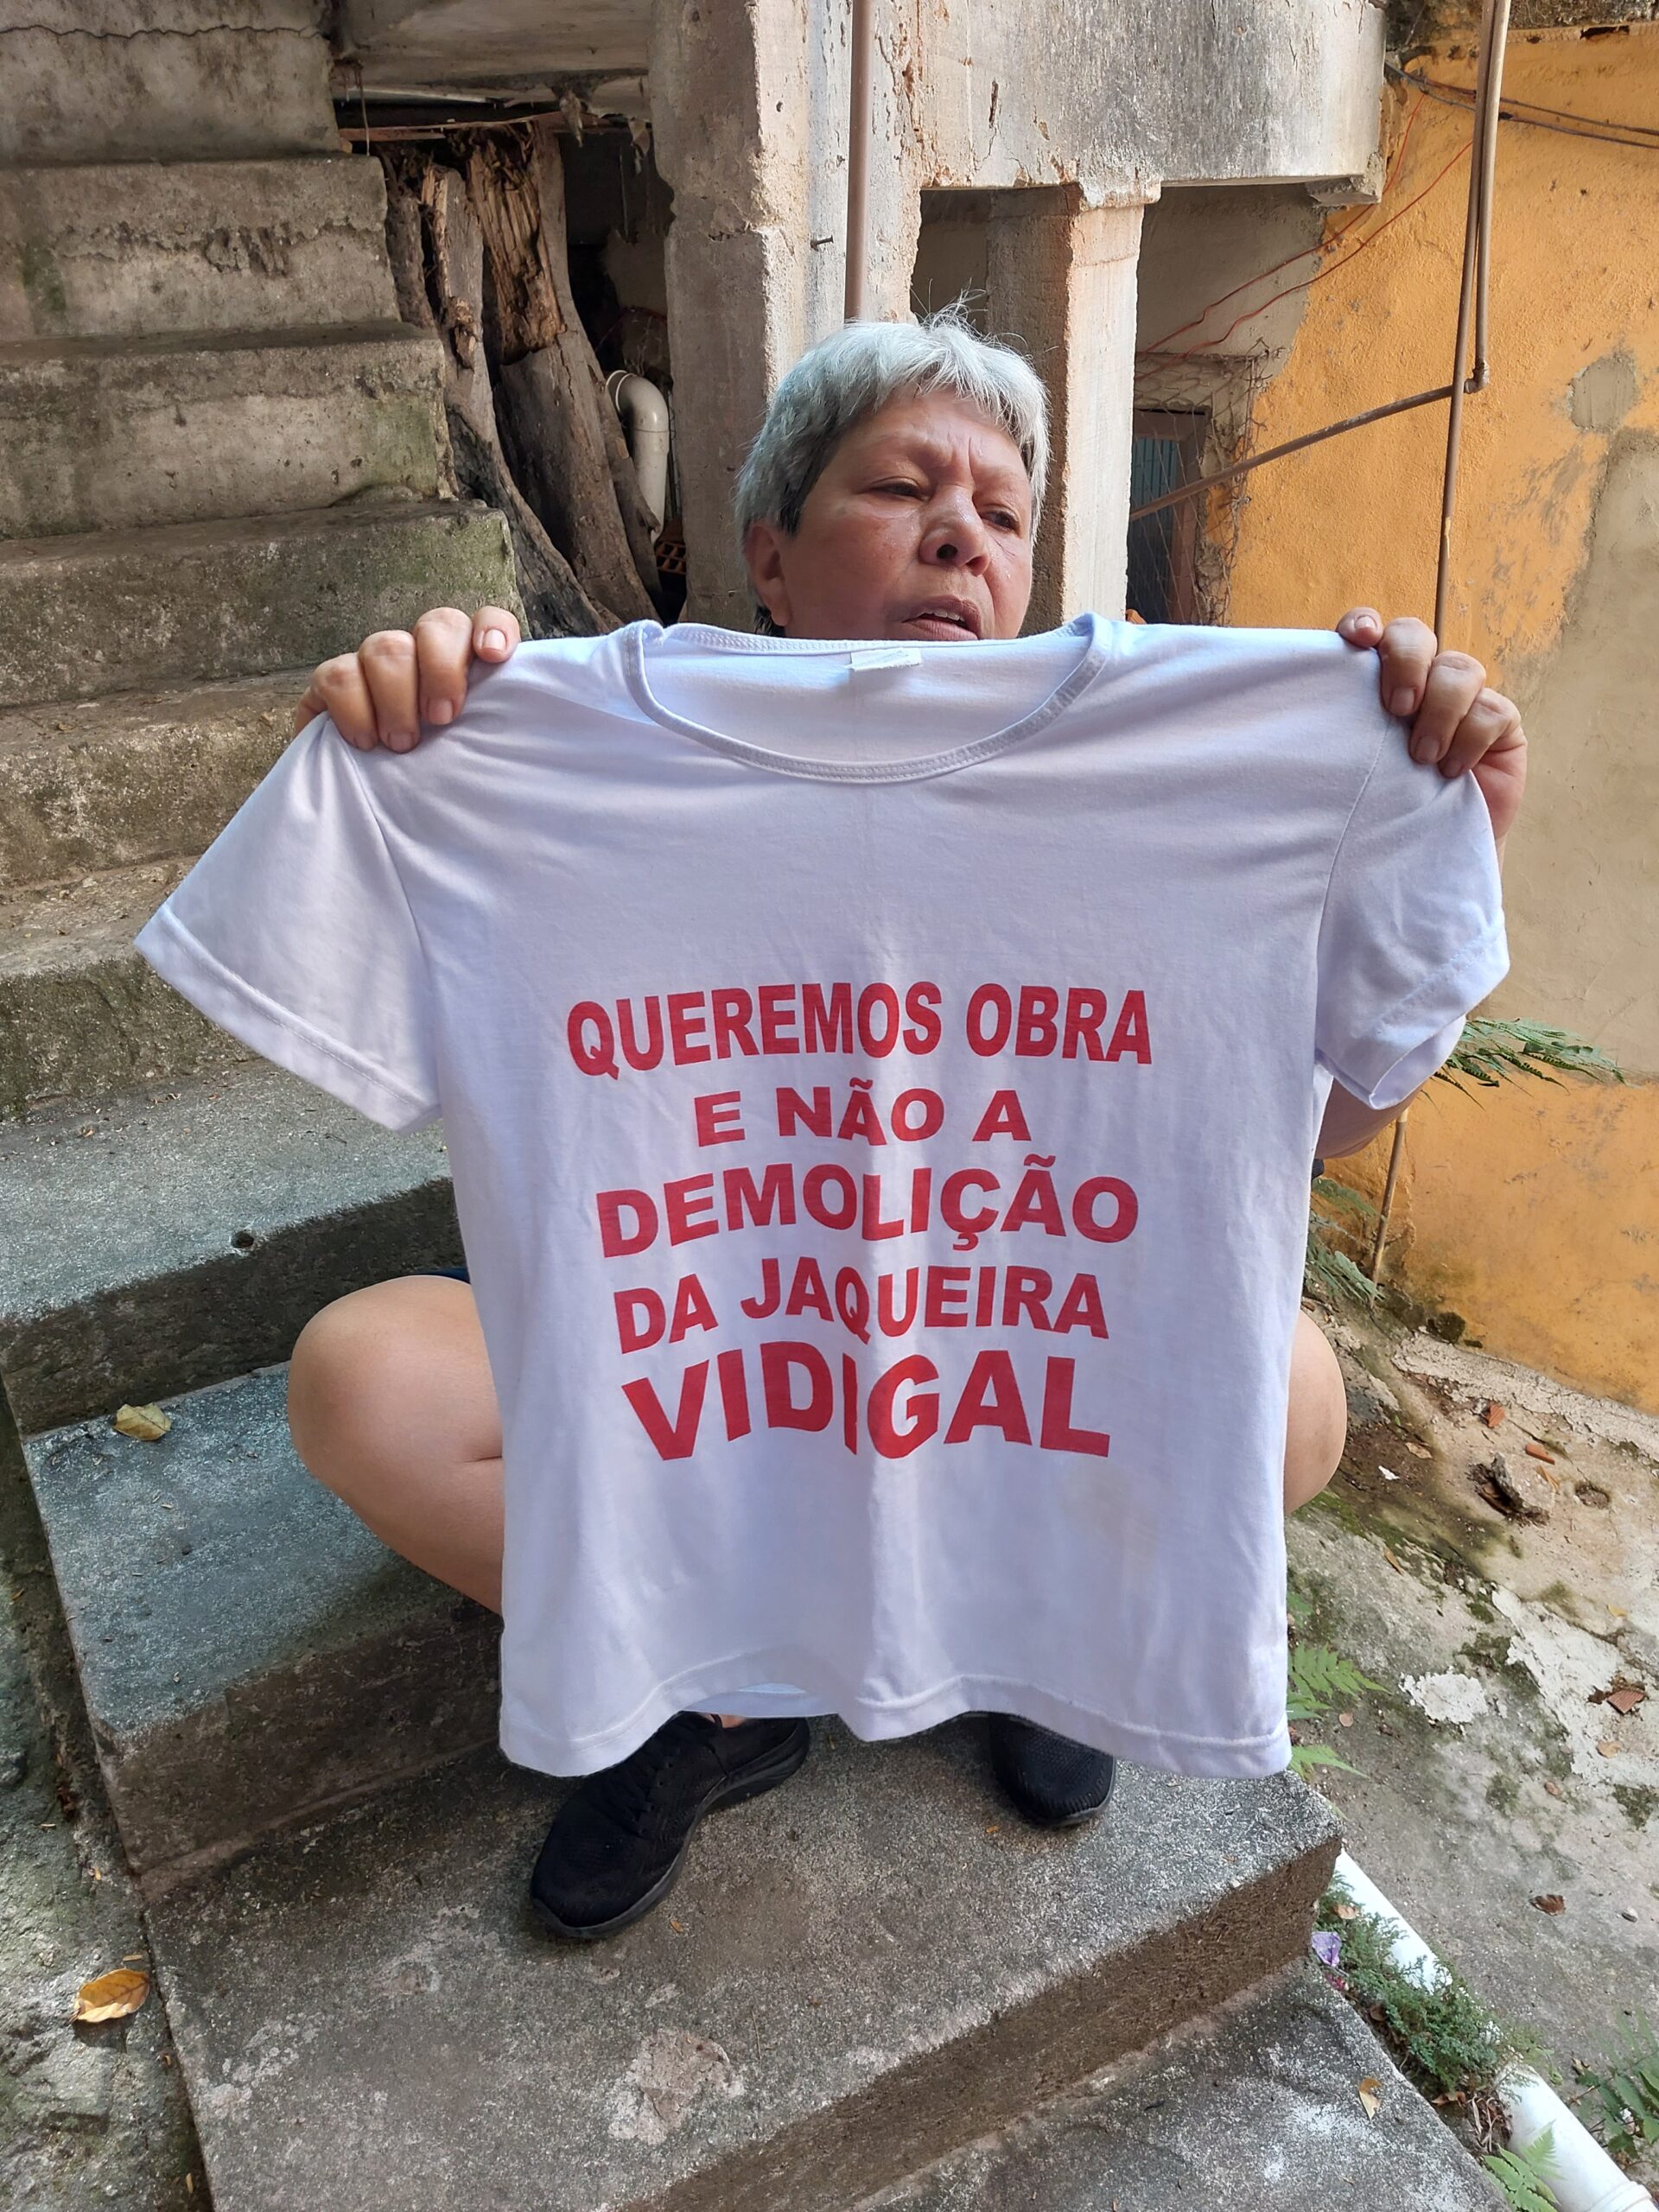 Ms. Deise requests that containment projects be carried out without the removal of residents. The t-shirt reads "We want works and not the demolition of Jaqueira Vidigal." Photo: Bárbara Nascimento